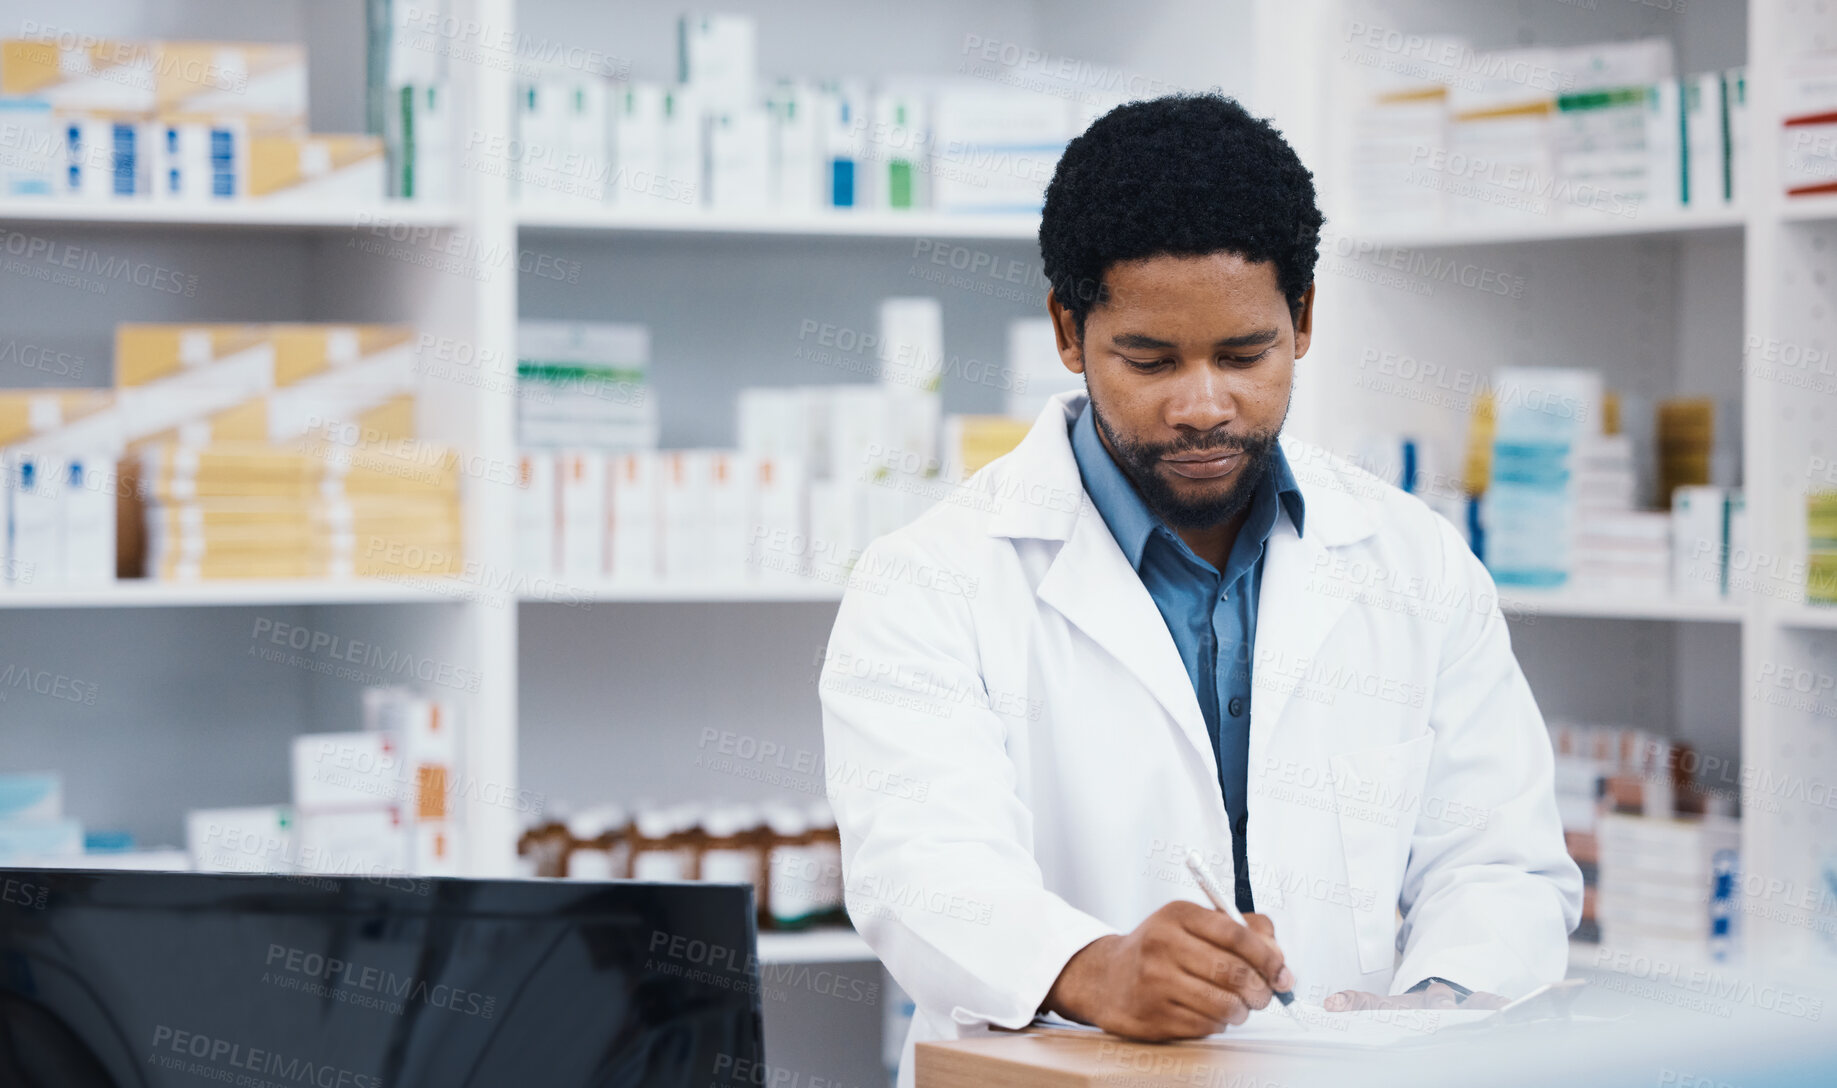 Buy stock photo Pharmacist, stock or black man writing on clipboard for medicine check, retail research or medical prescription in drugstore. Notes, pharmacy or worker on paper documents in pills checklist or order